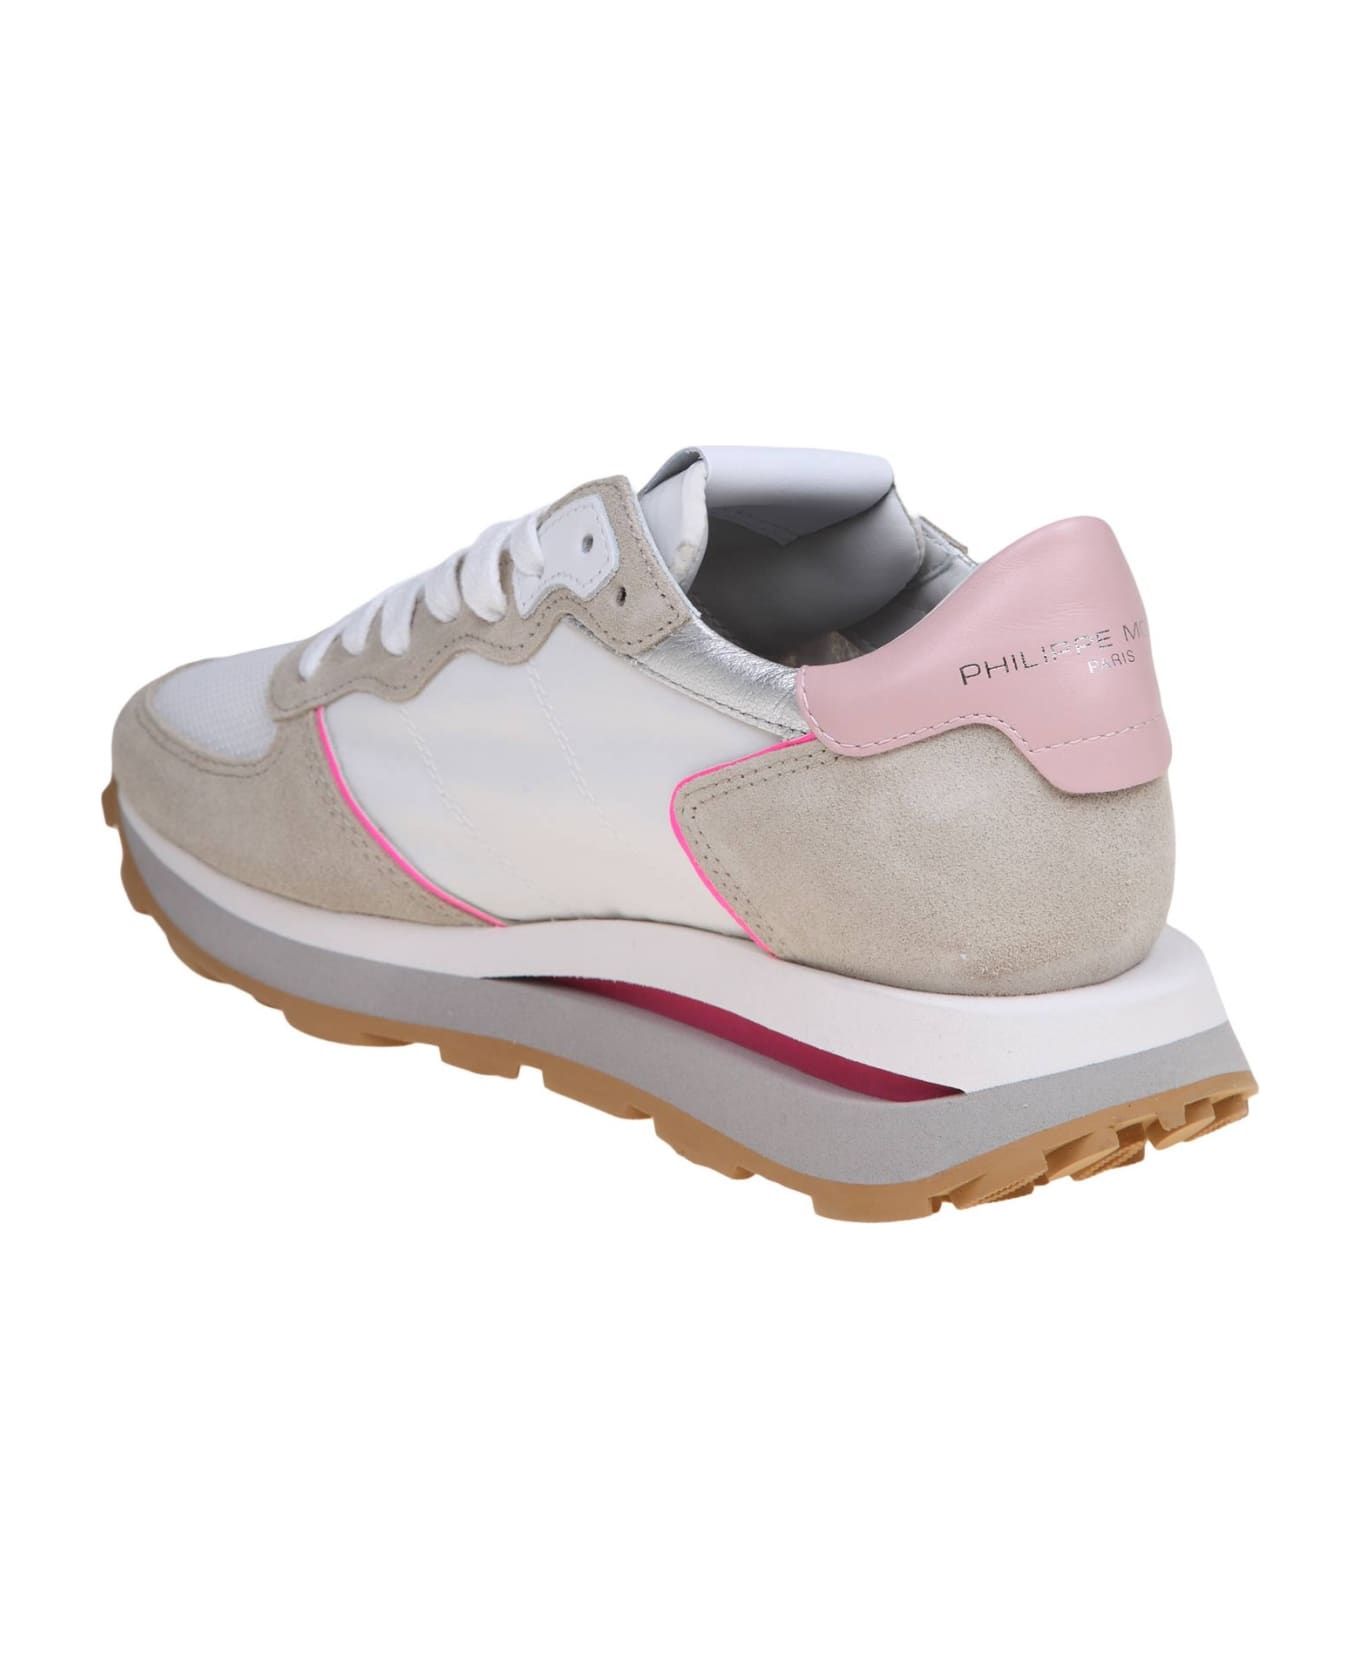 Philipp Plein Philippe Model Tropez Sneakers In Suede And Nylon Color White And Pink - White/Rose